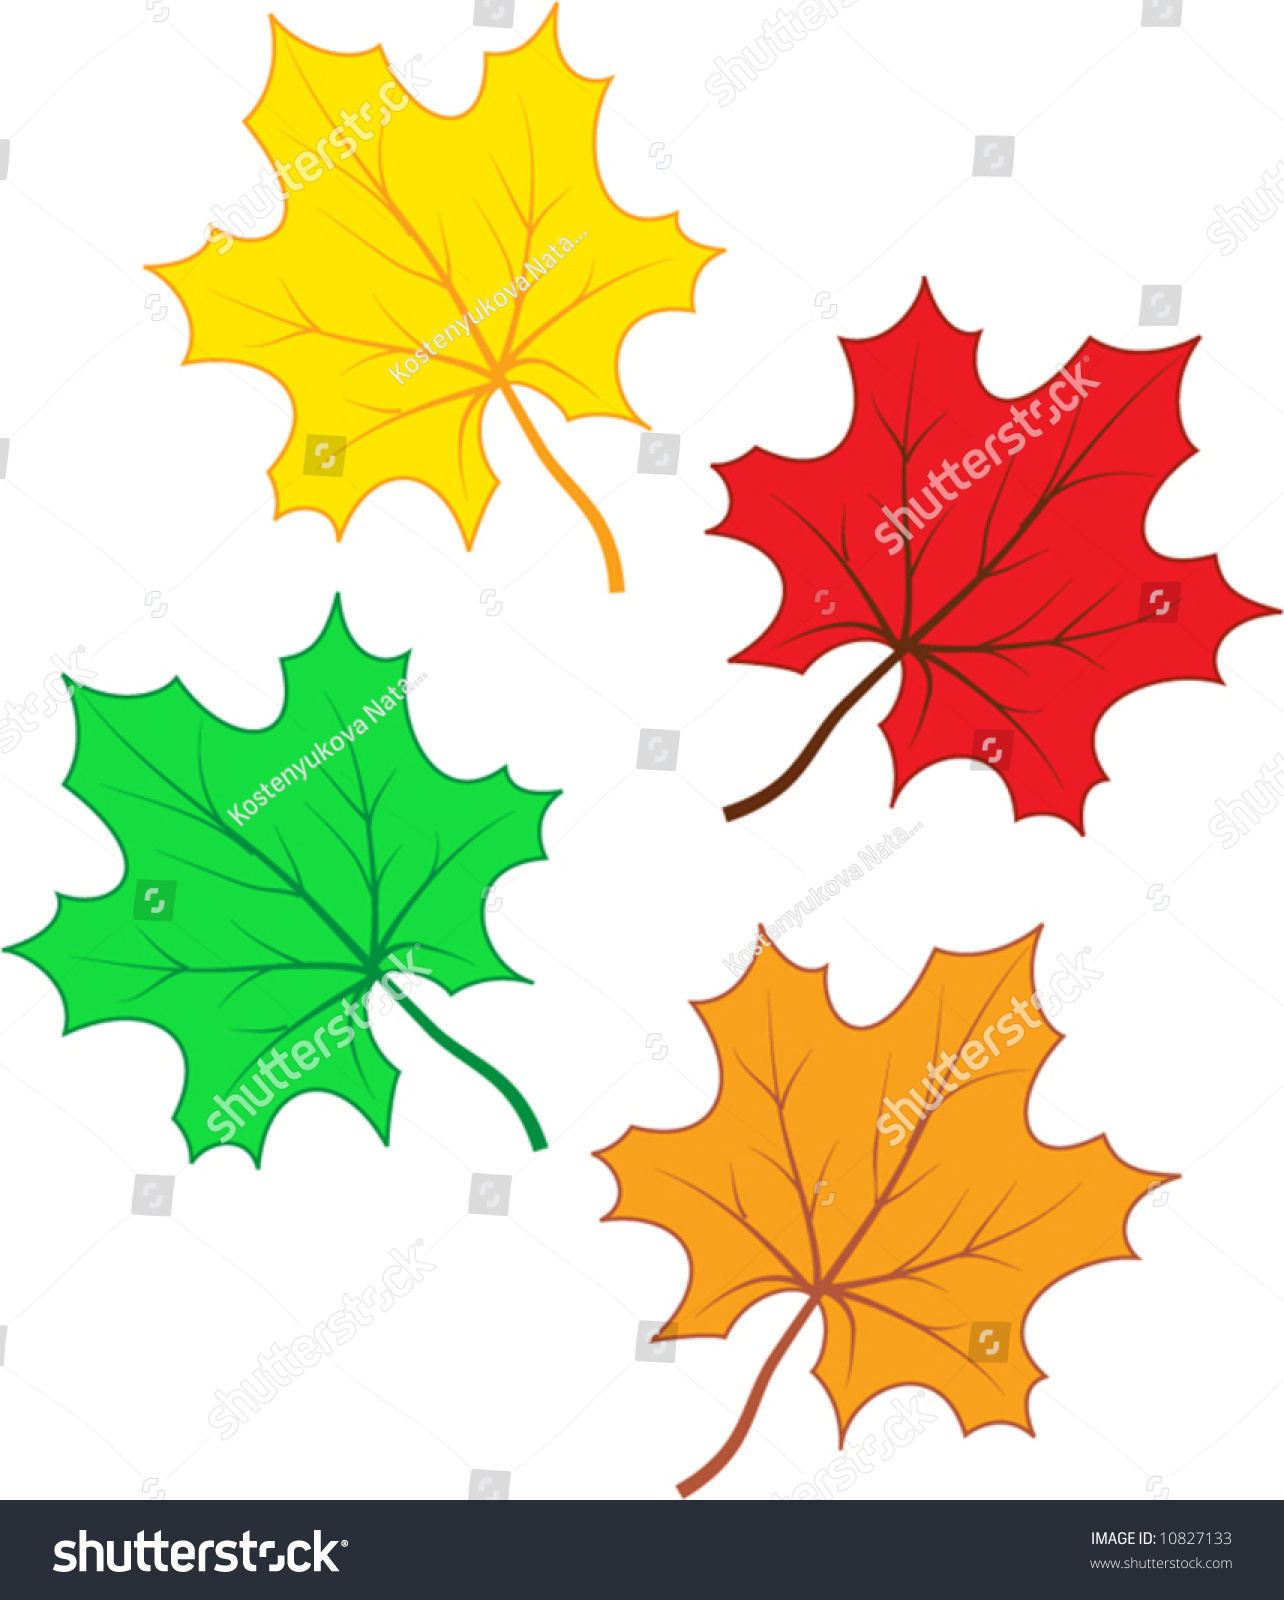 clipart green maple leaf - photo #39